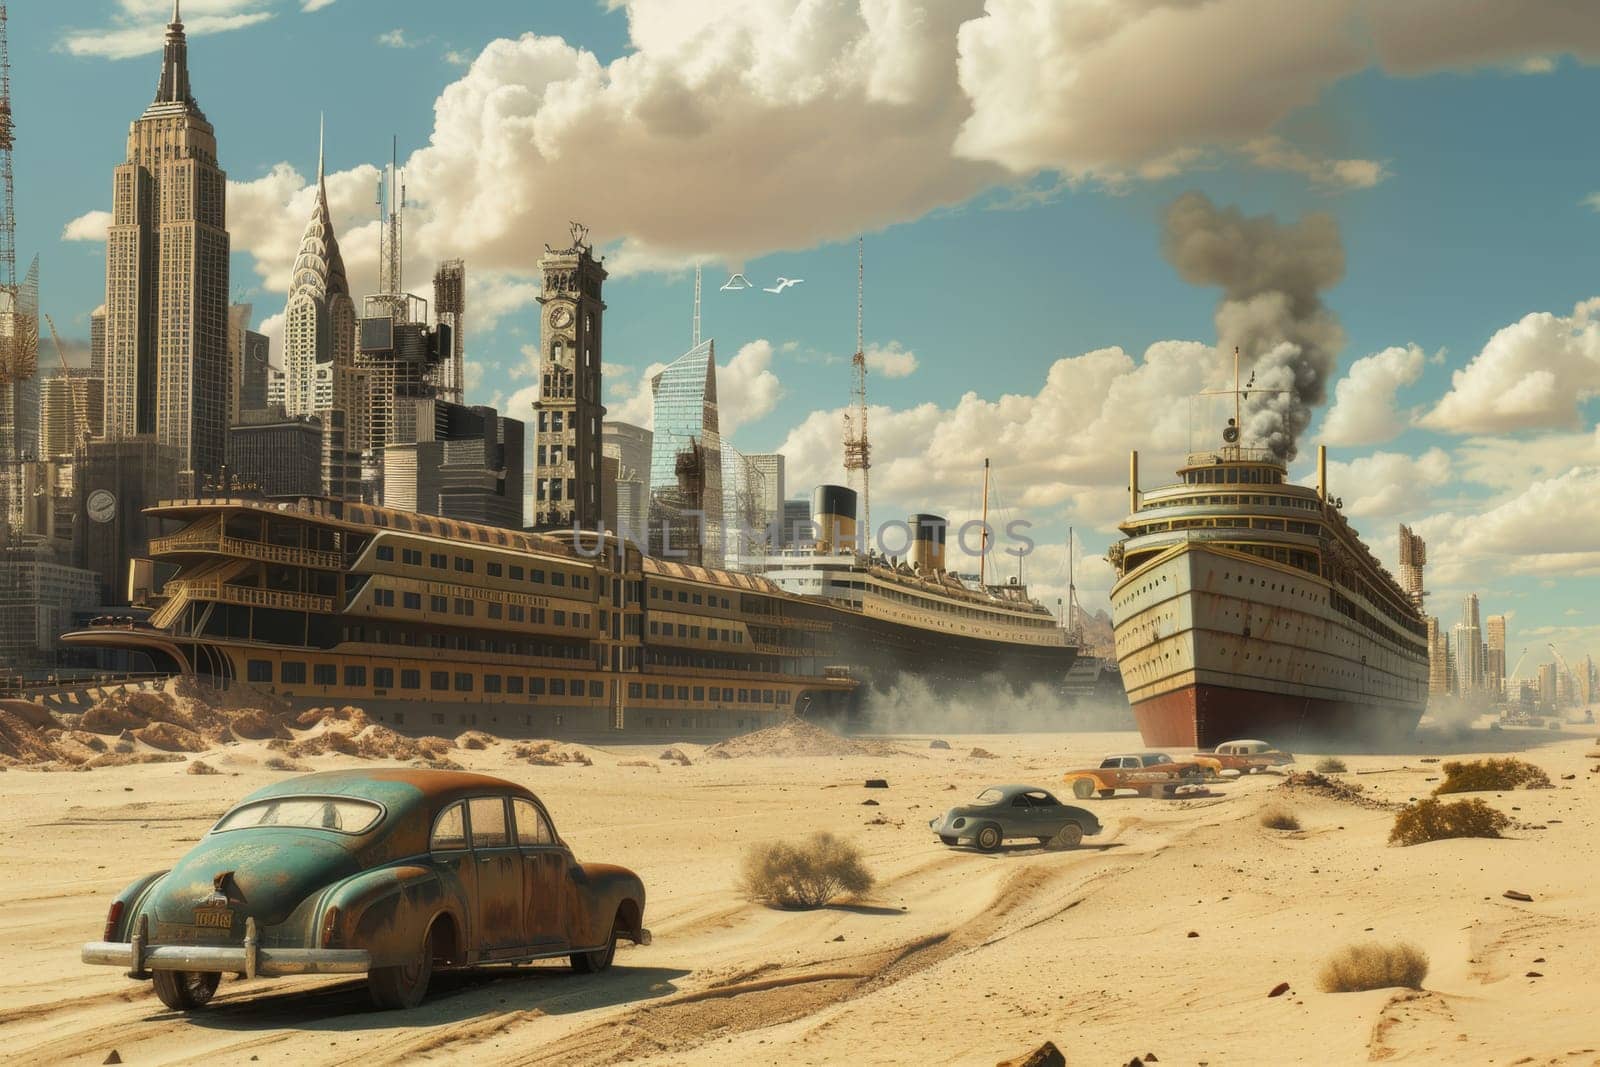 A picture of a desert landscape with tasks, cars and a ship. Illustration by Lobachad